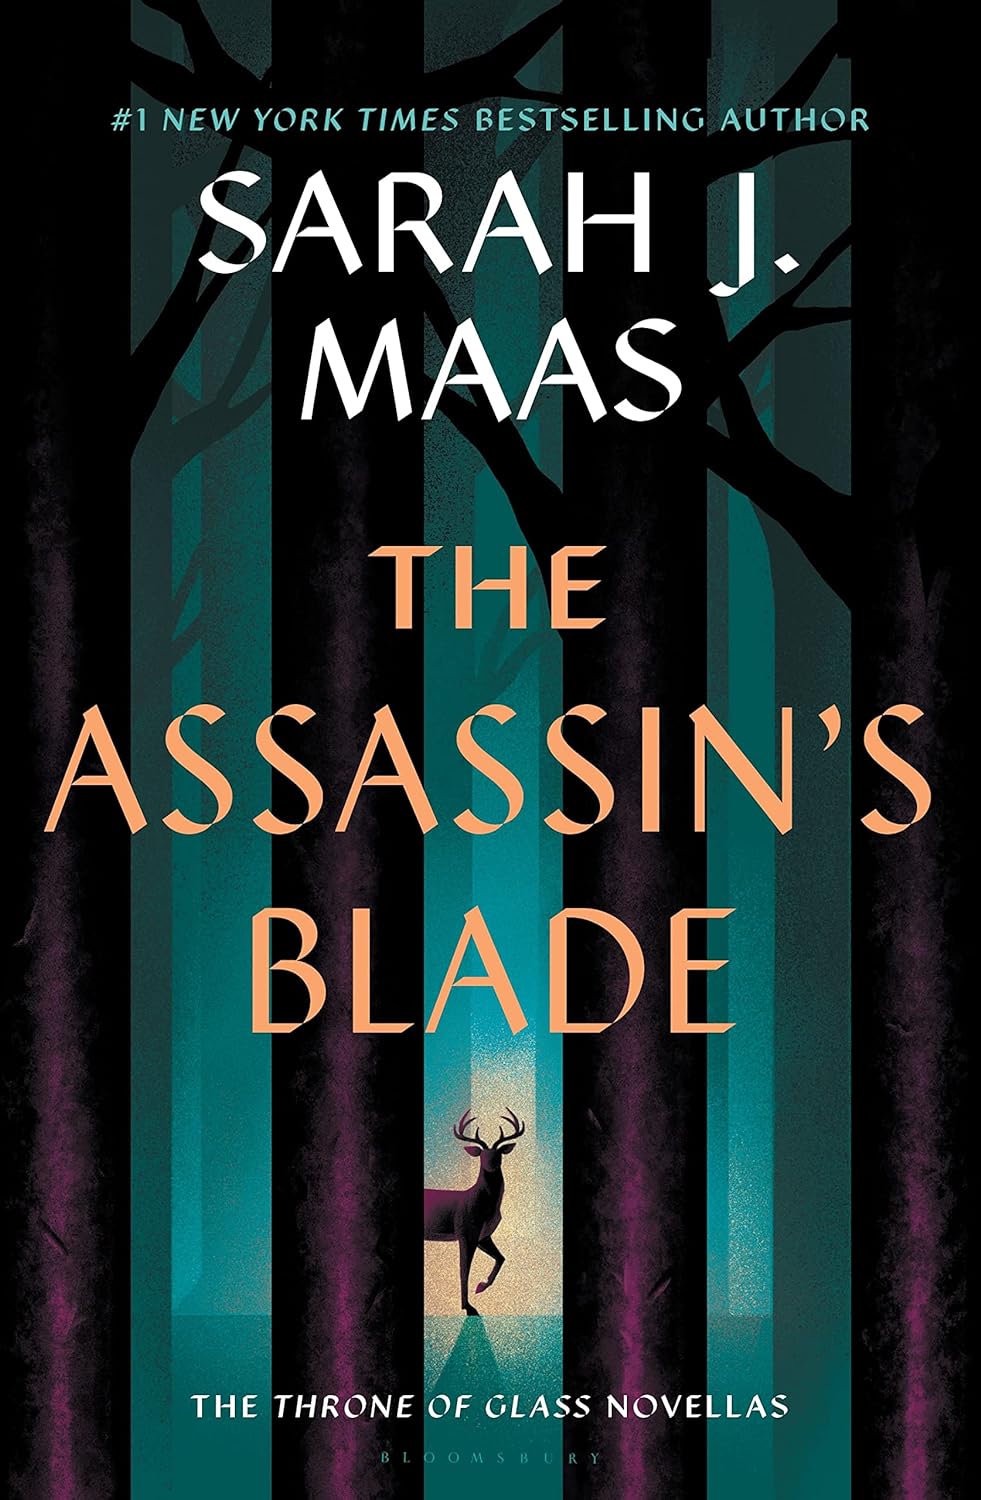 The Assassin's Blade: The Throne of Glass Prequel Novellas (Throne of Glass #8) - by Sarah J Maas